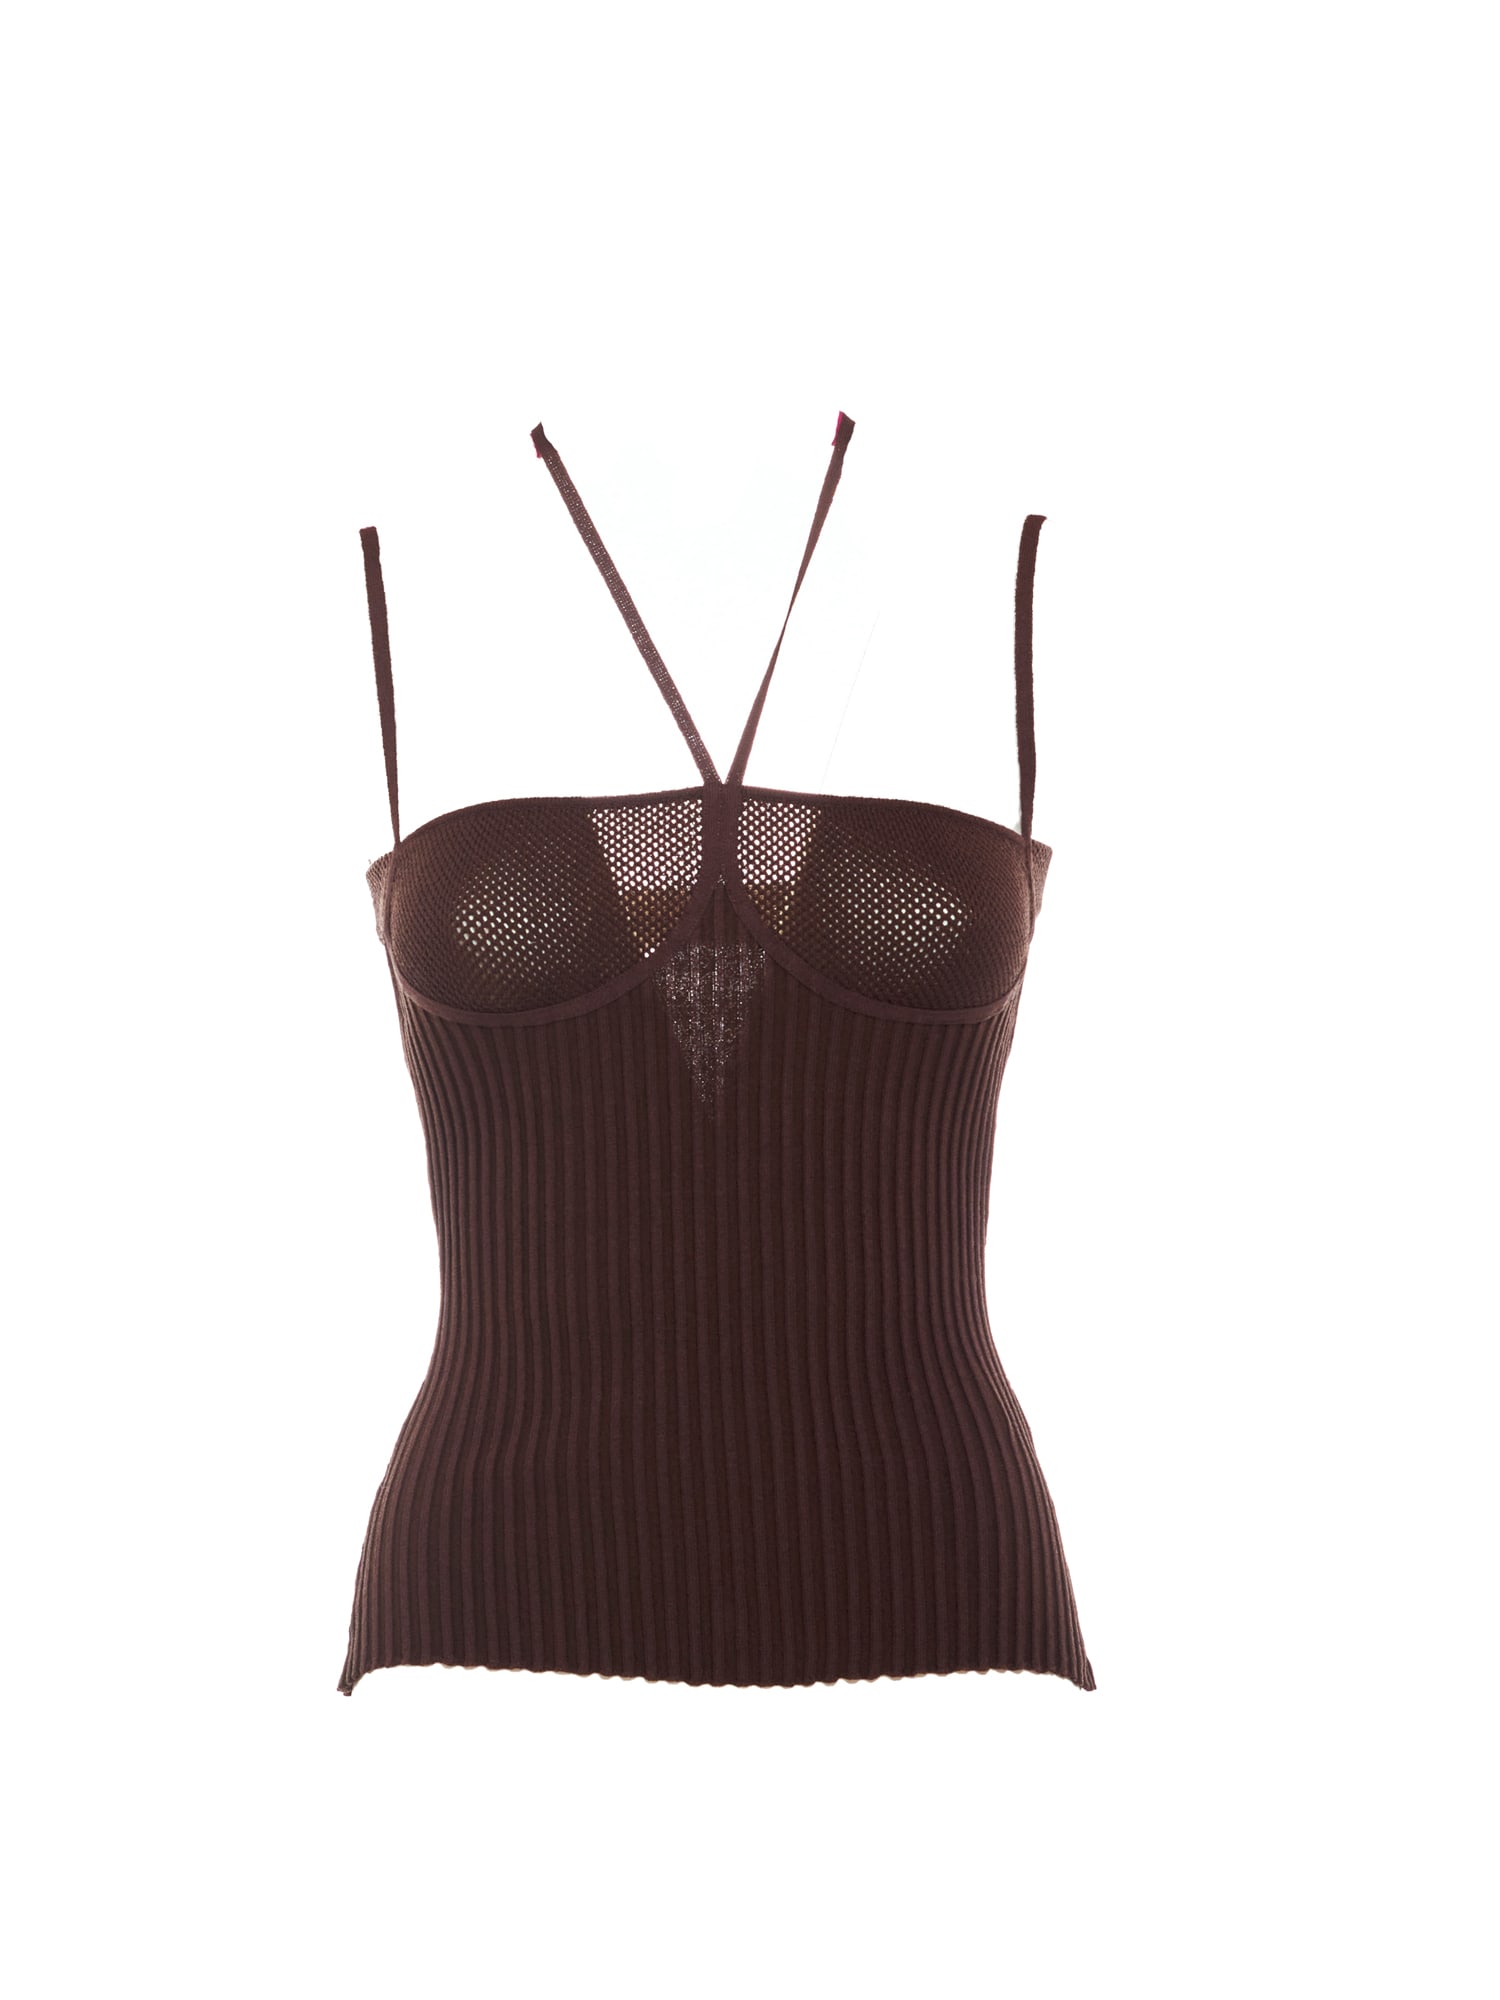 ANDREADAMO Ribbed Knit Top With Fishnet Bra